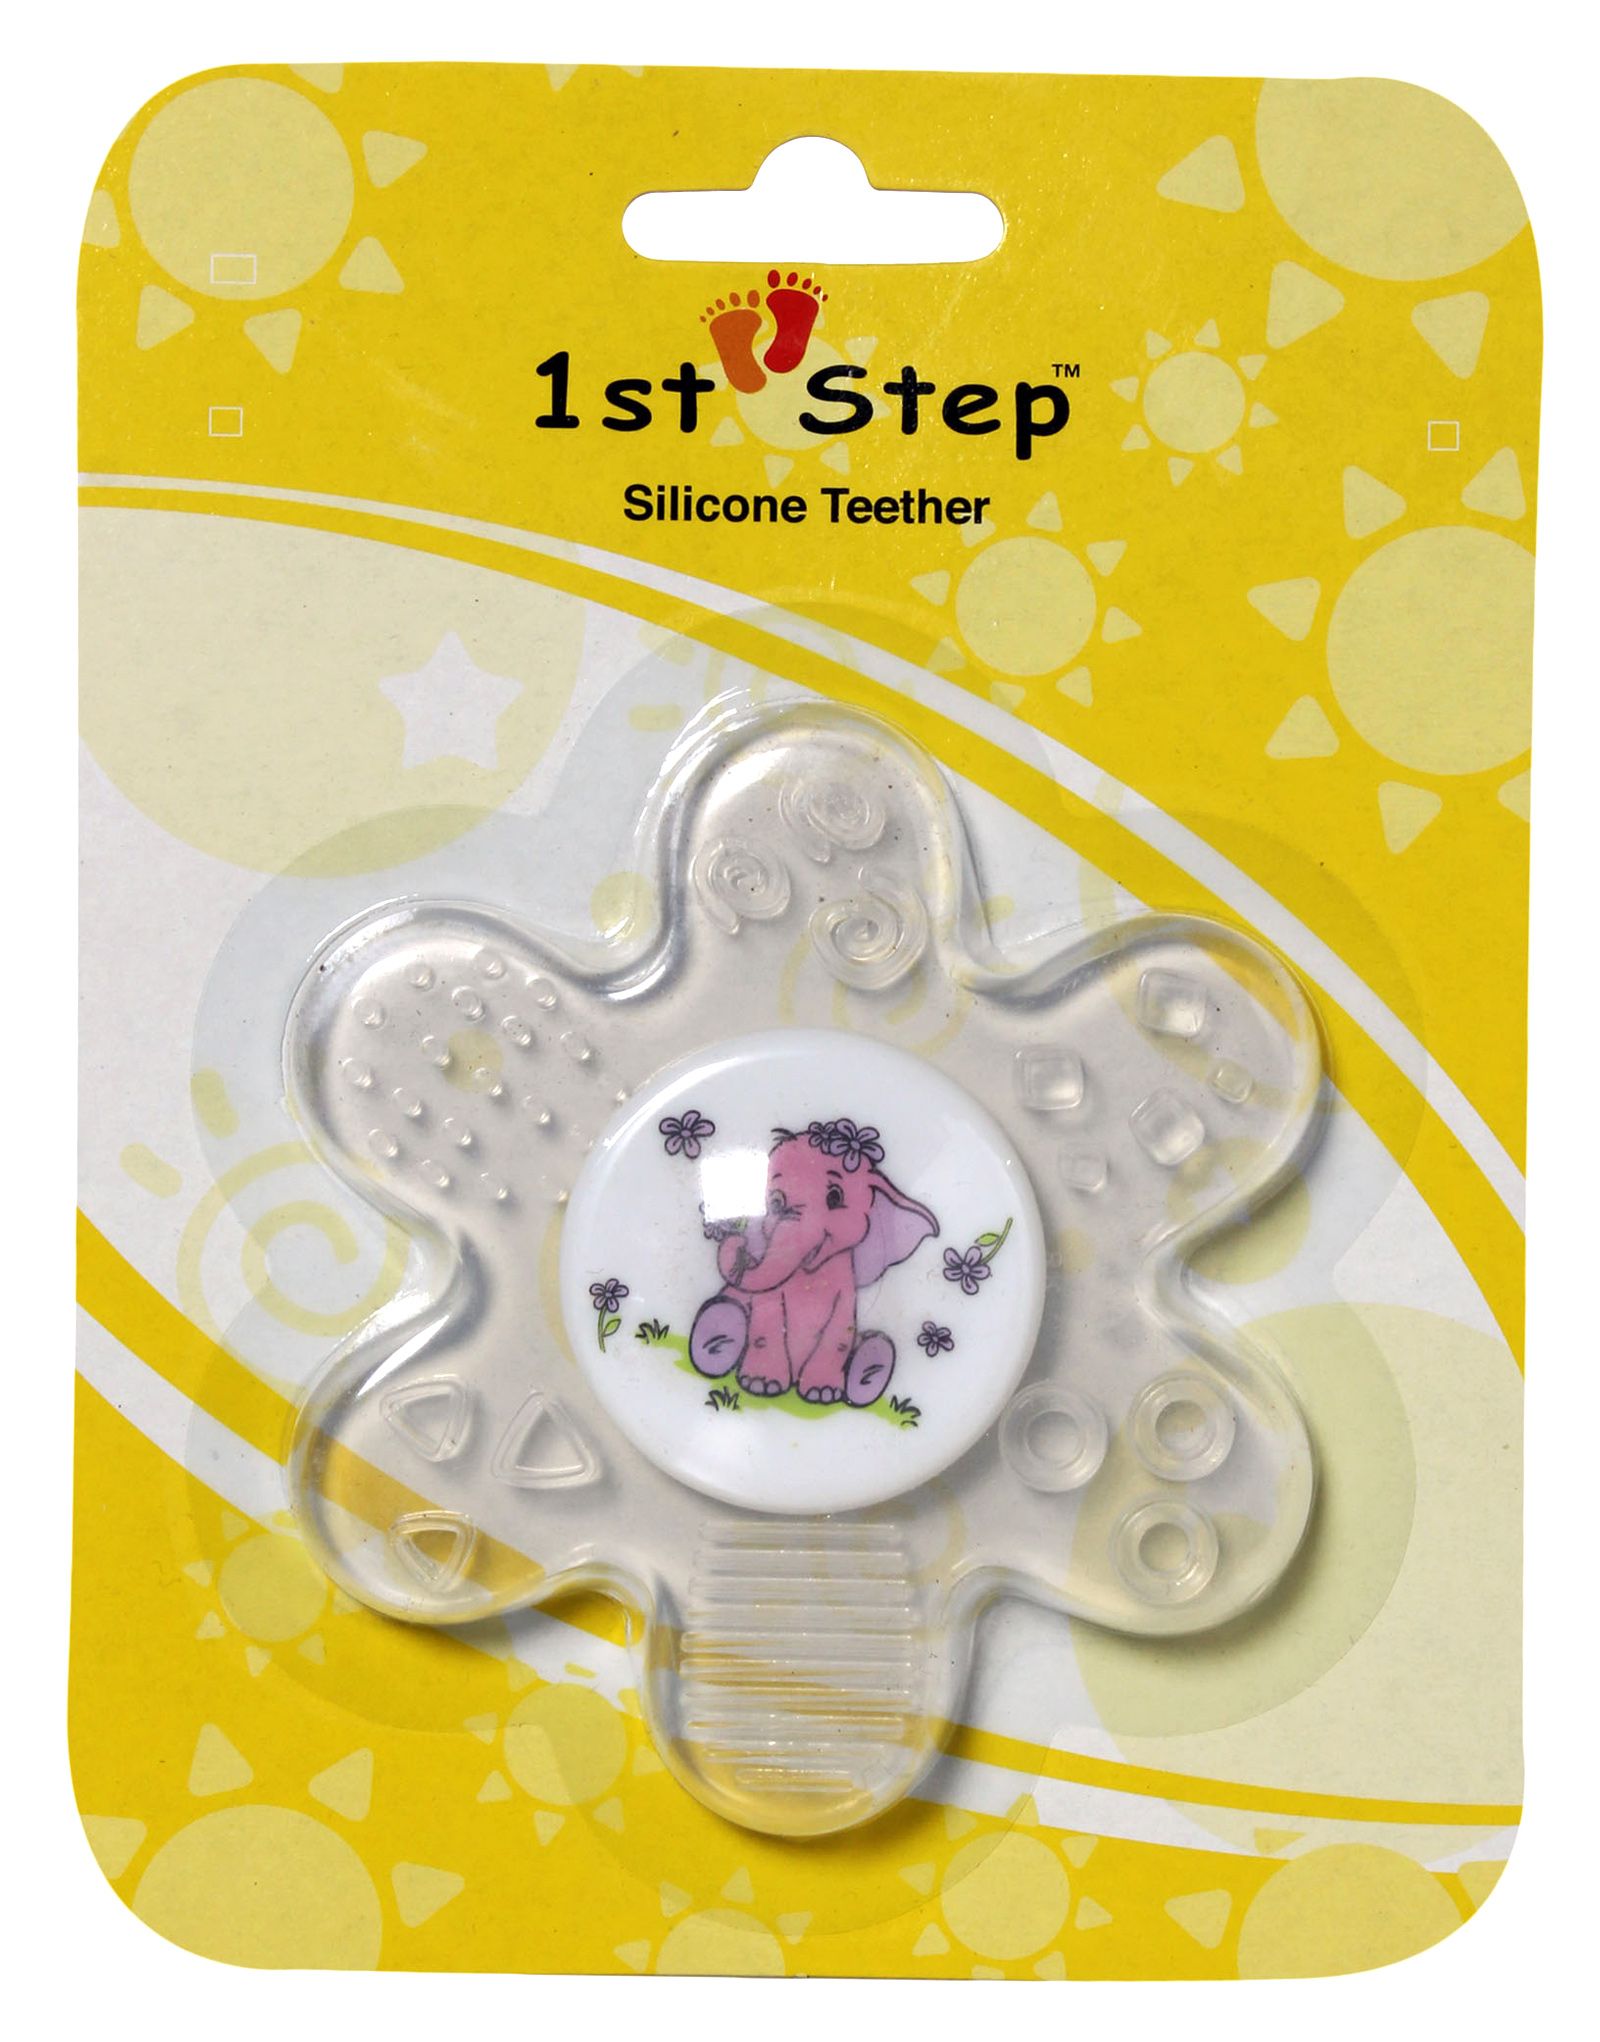 1st Step - Silicone Teether